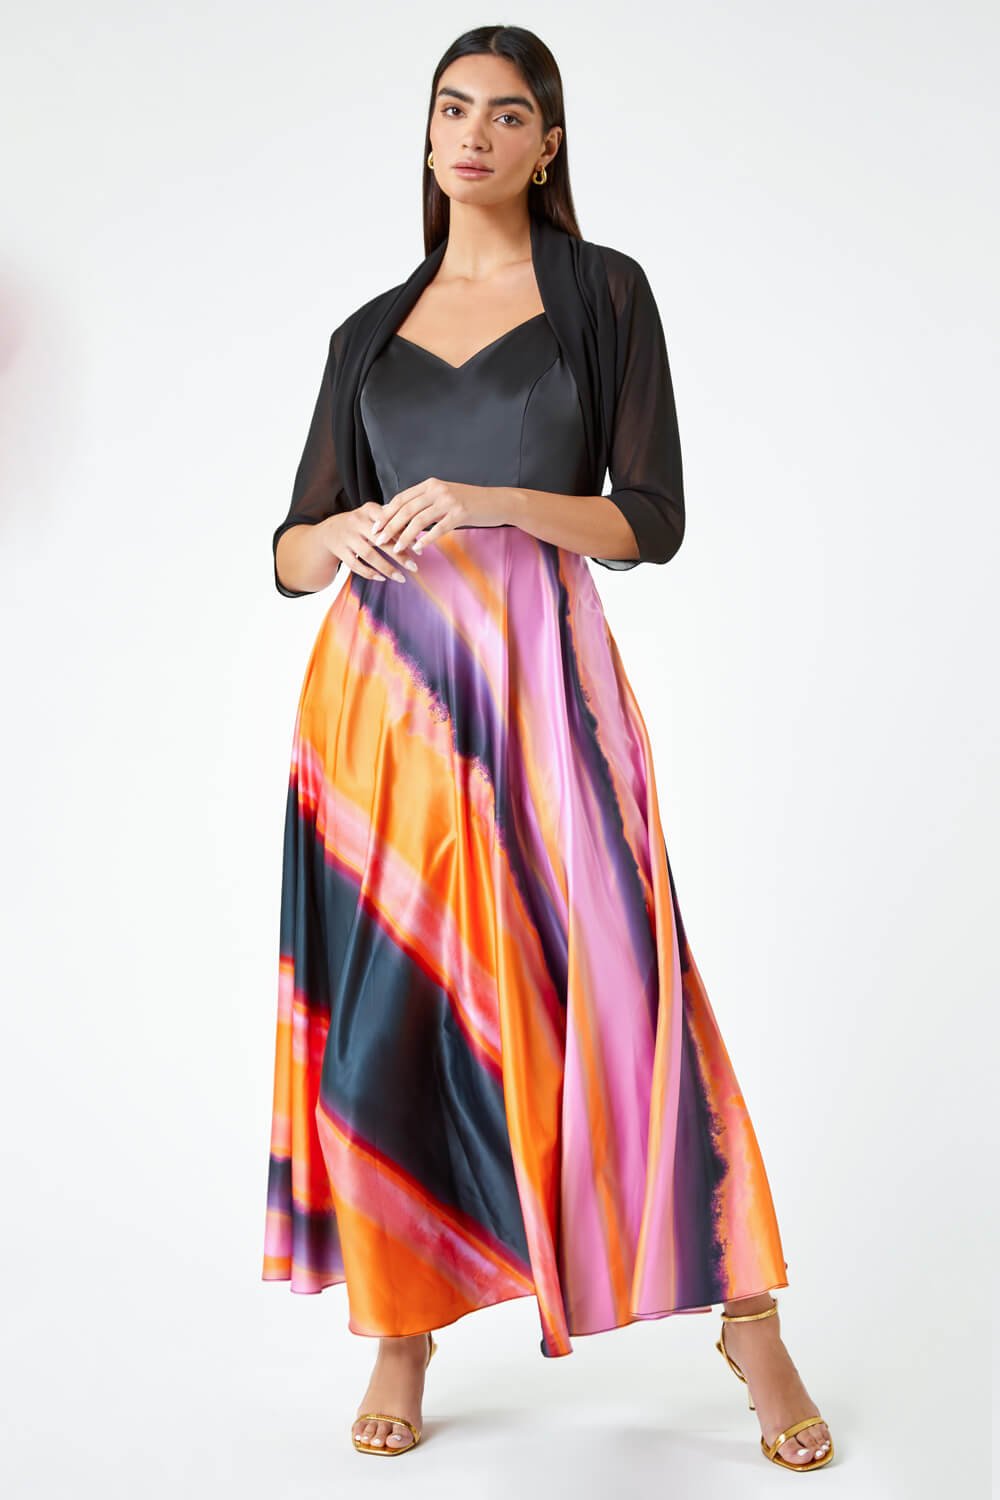 PINK Luxe Colourblock Fit & Flare Maxi Dress, Image 6 of 6